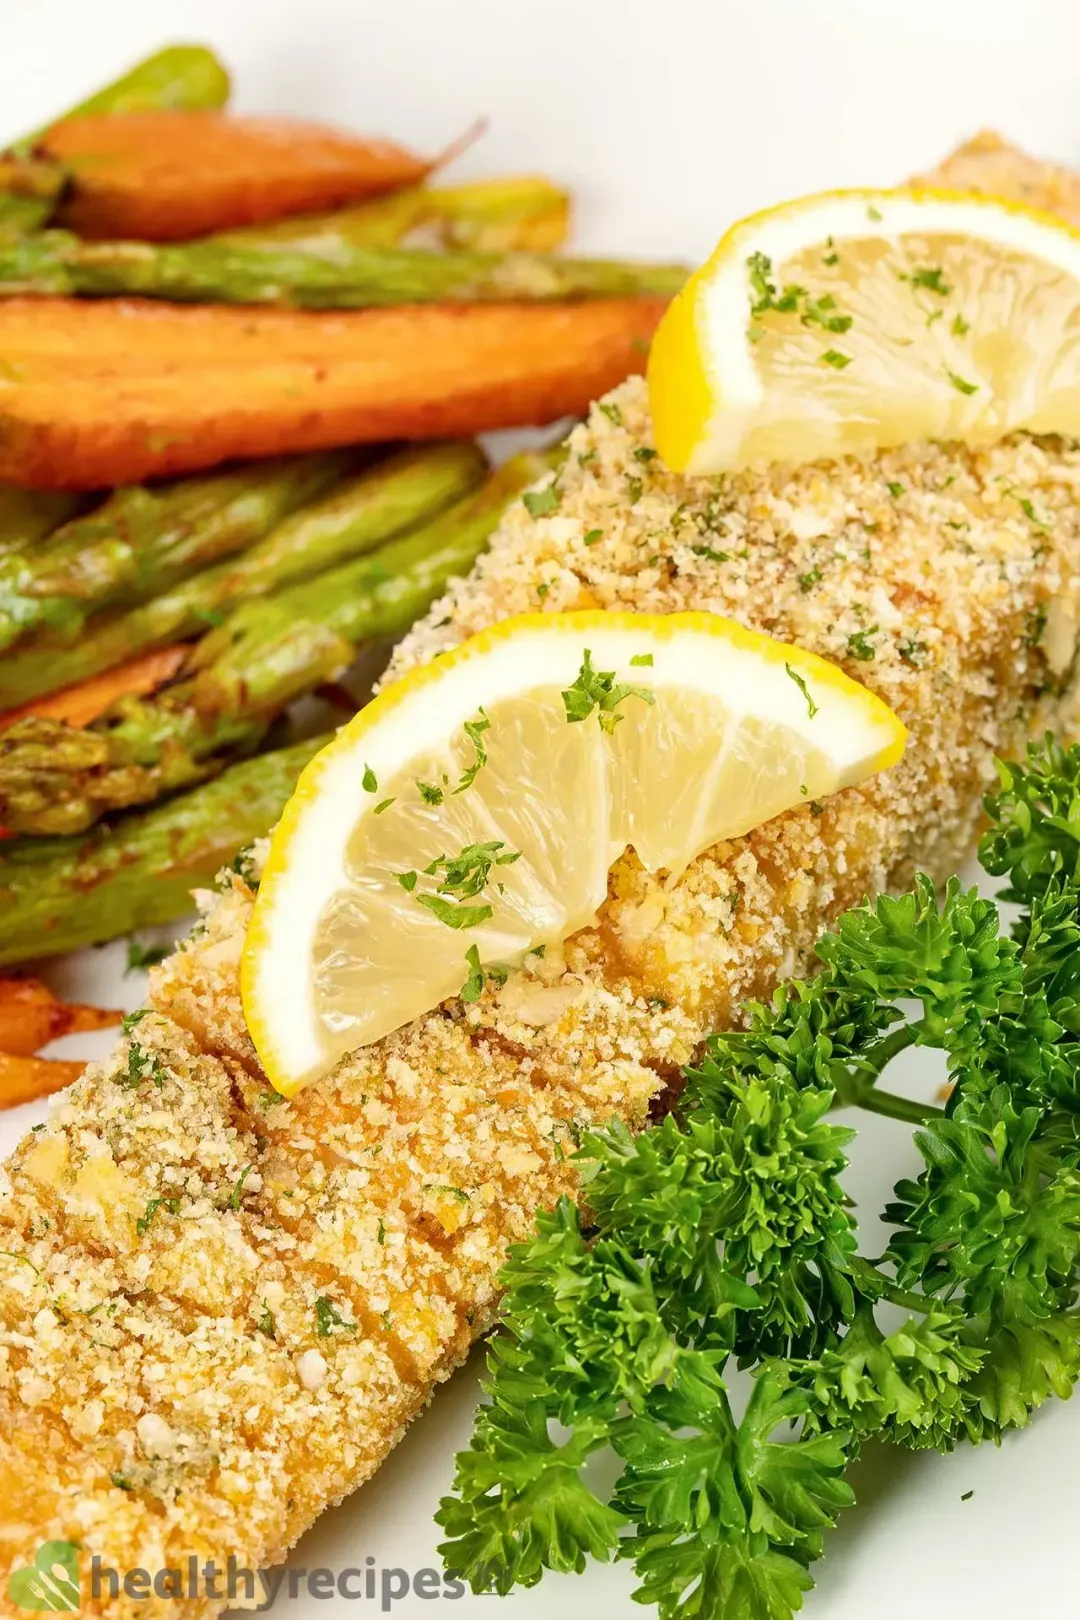 A close-up shot of a breadcrumb-crusted salmon fillet surrounded by lemon pieces and parsley with carrots and asparagus in the blurred background